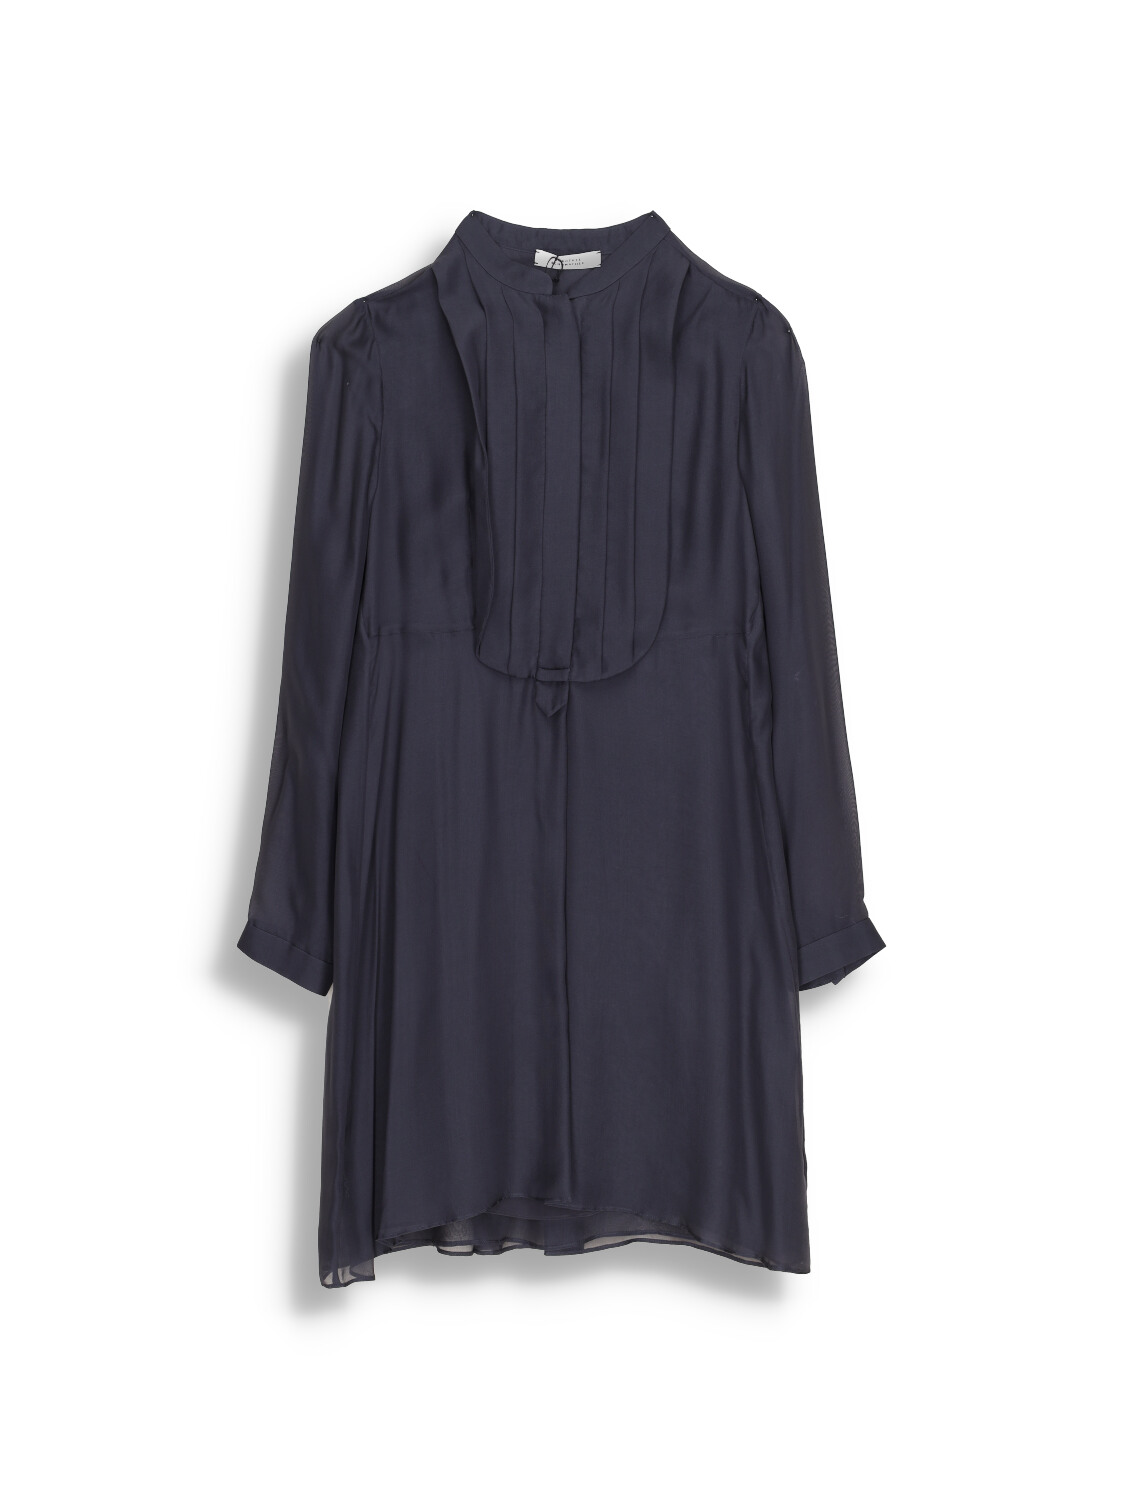 Playful - Midi dress with buttons at neckline in silk